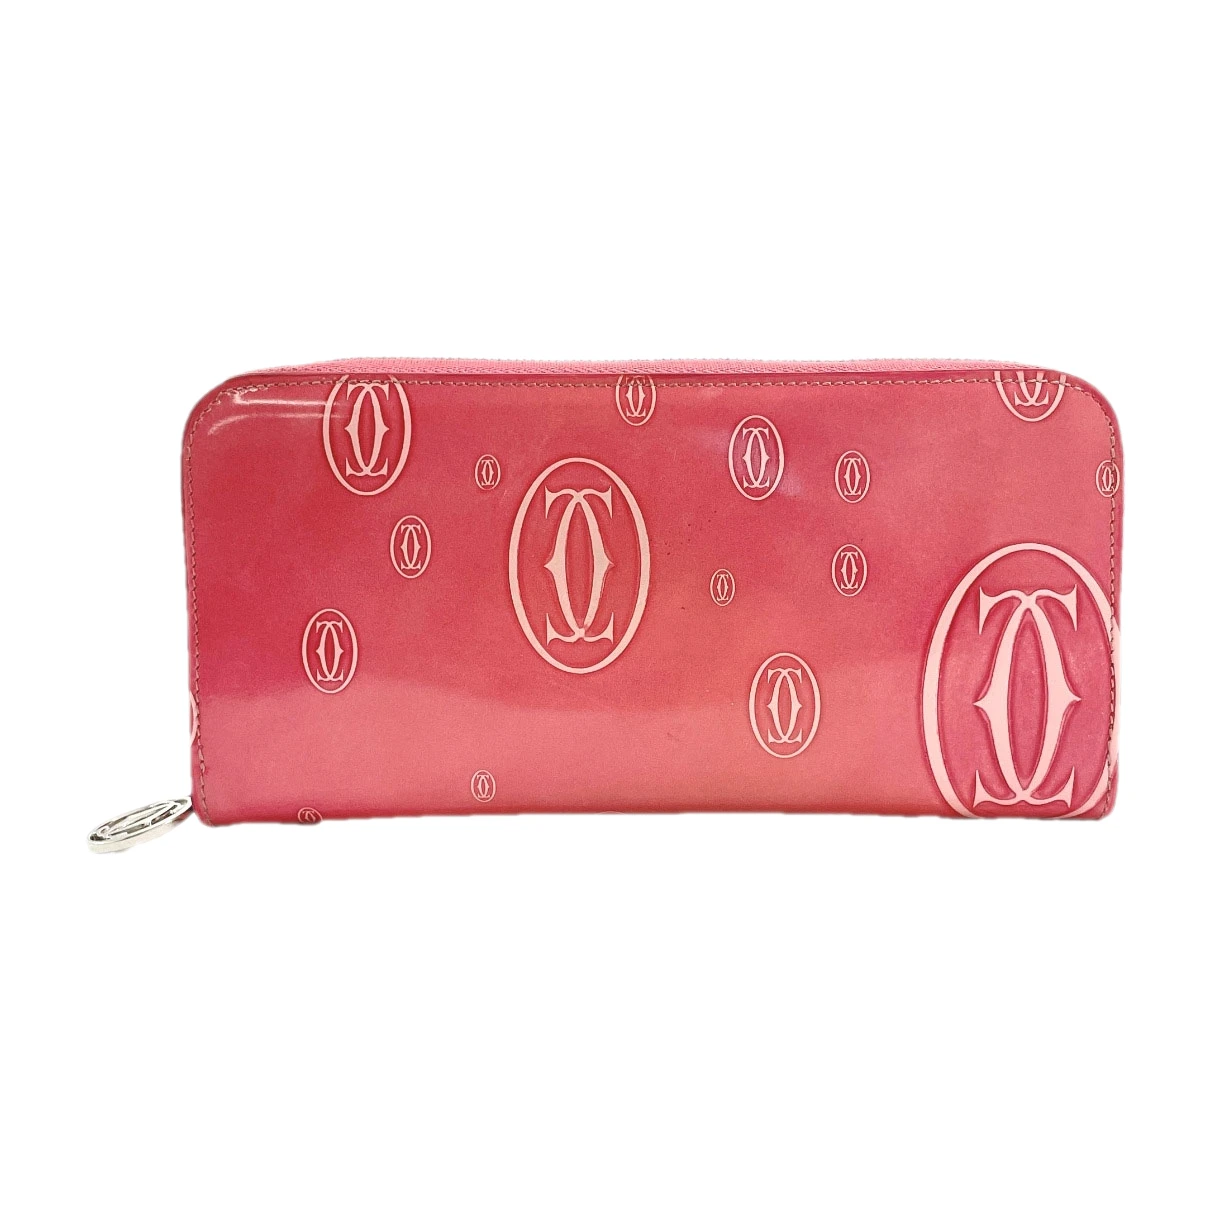 Pre-owned Cartier Patent Leather Wallet In Pink